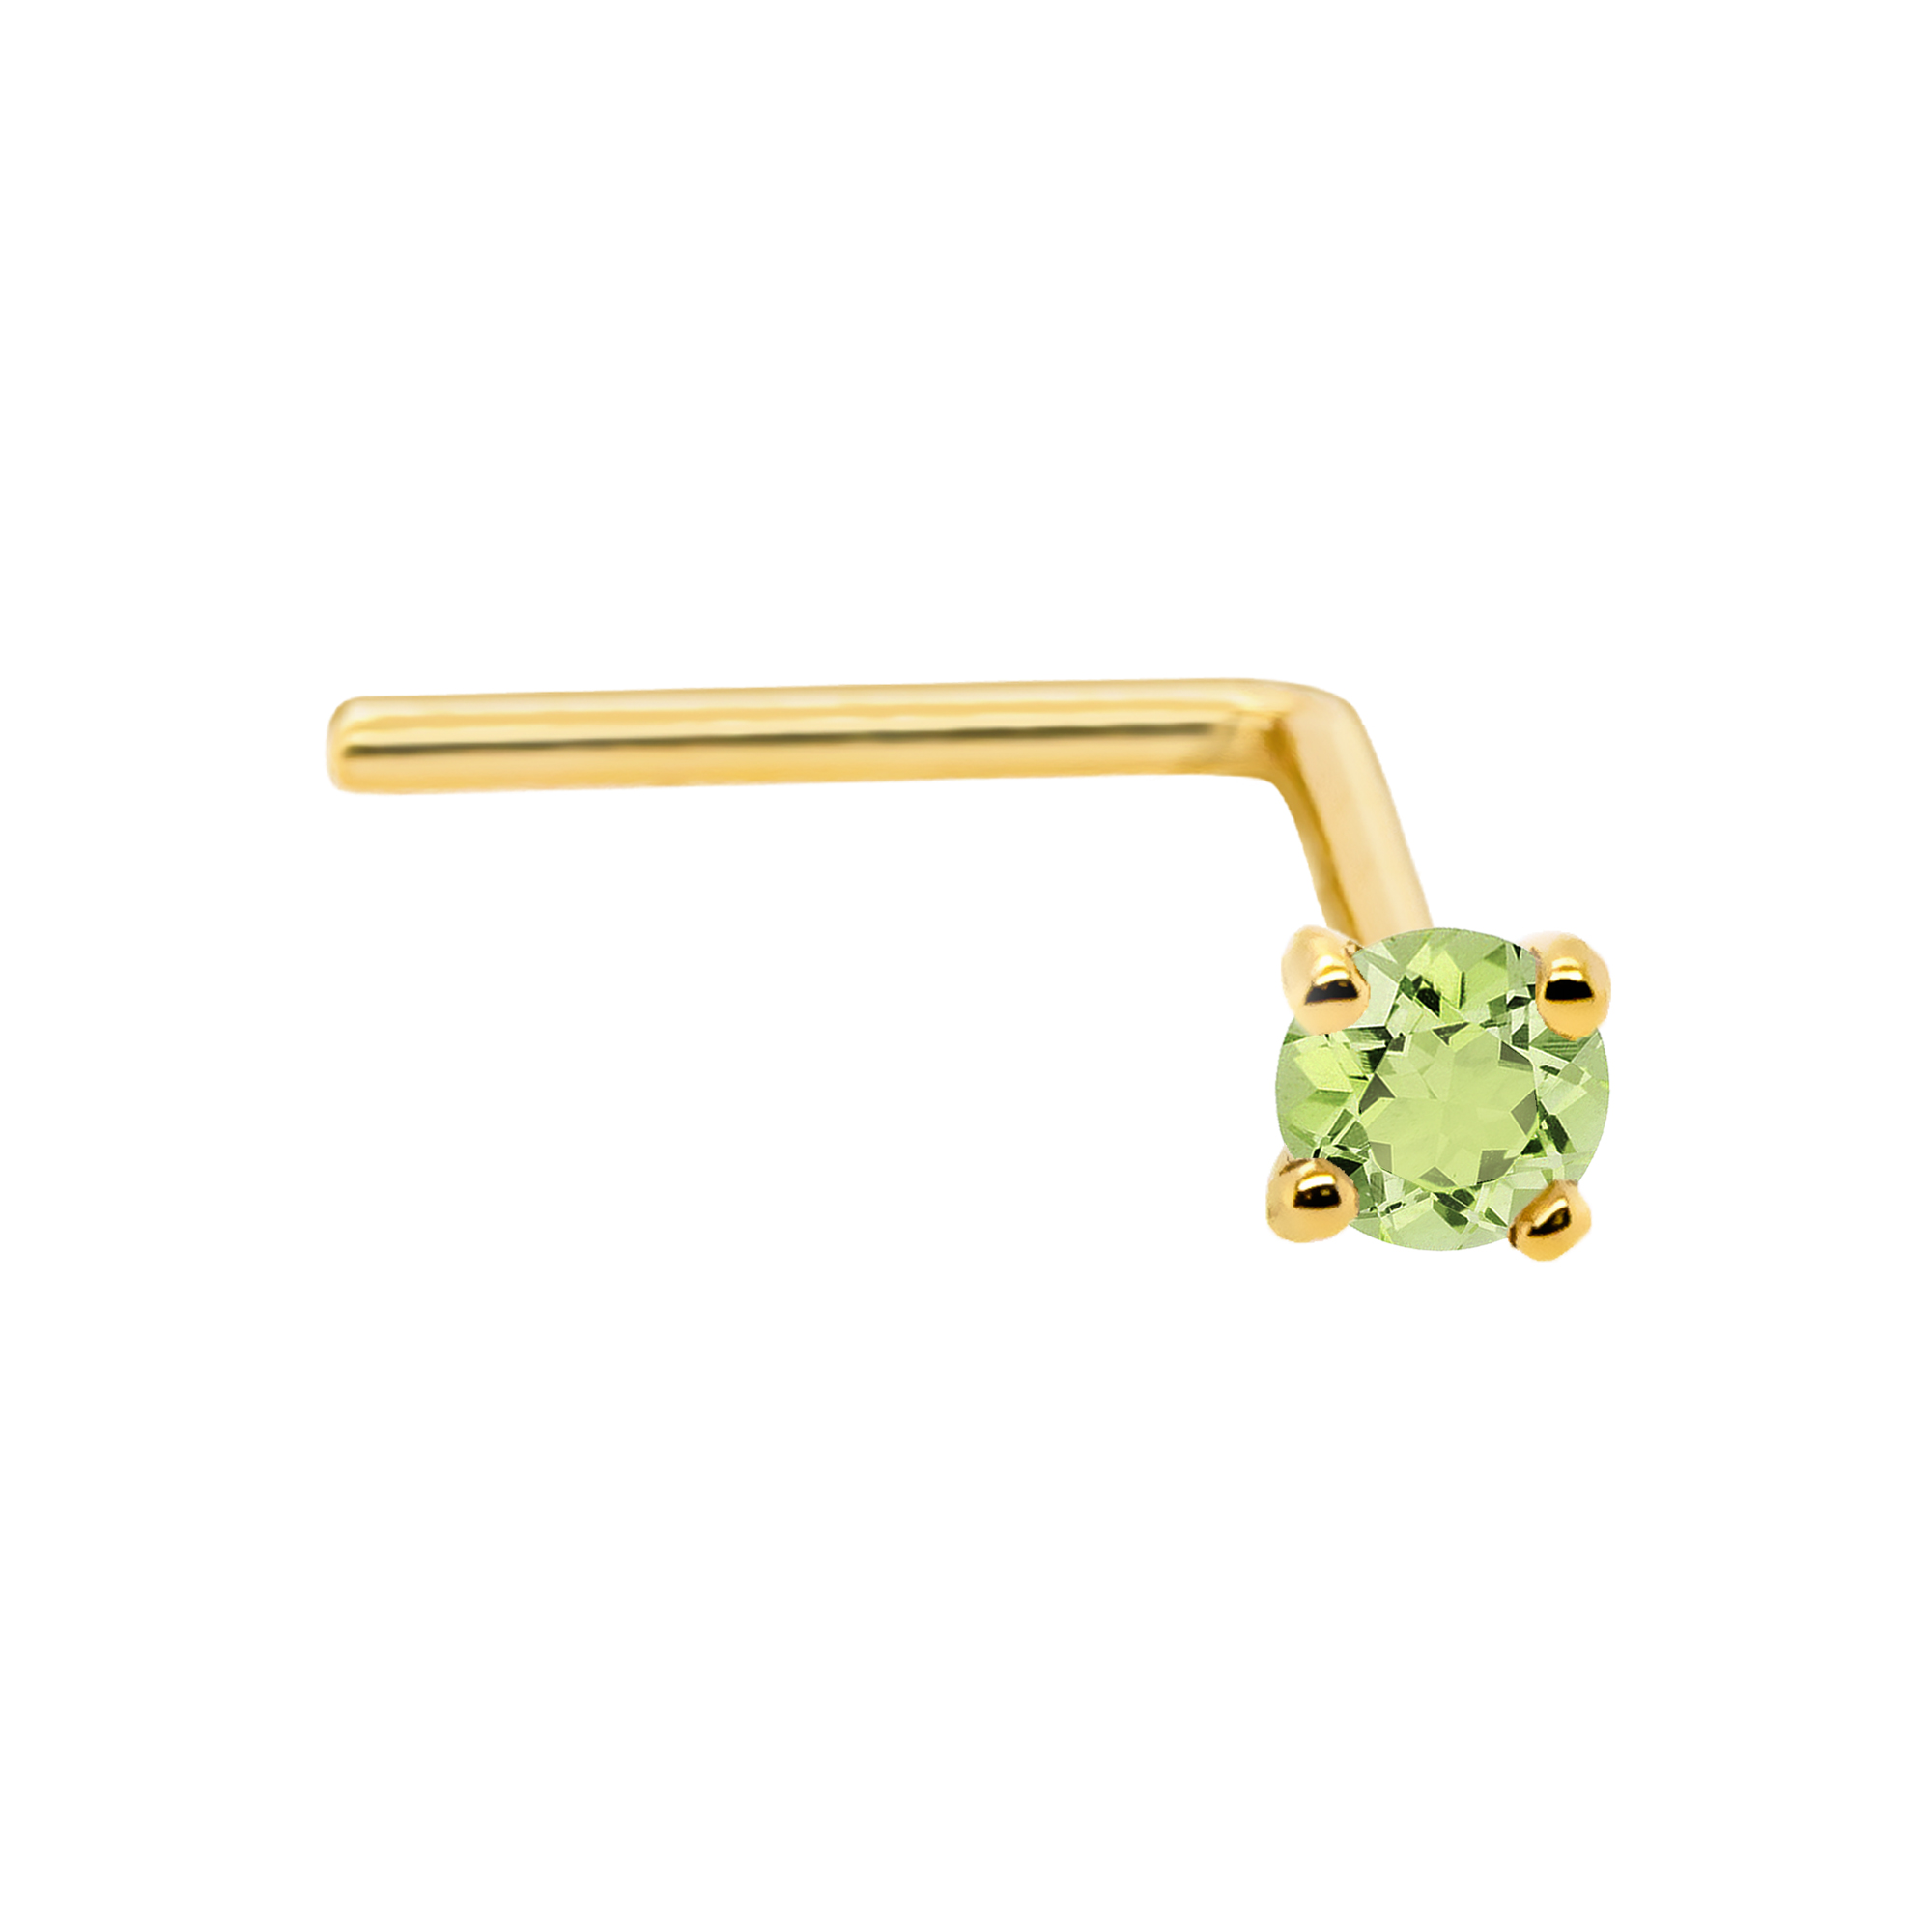 22G Solid 14Kt Gold L-Shape Nose Stud with real Peridot Gemstone, 14kt Yellow Gold or 14kt White Gold Prong Setting - August Birthstone Nose Ring